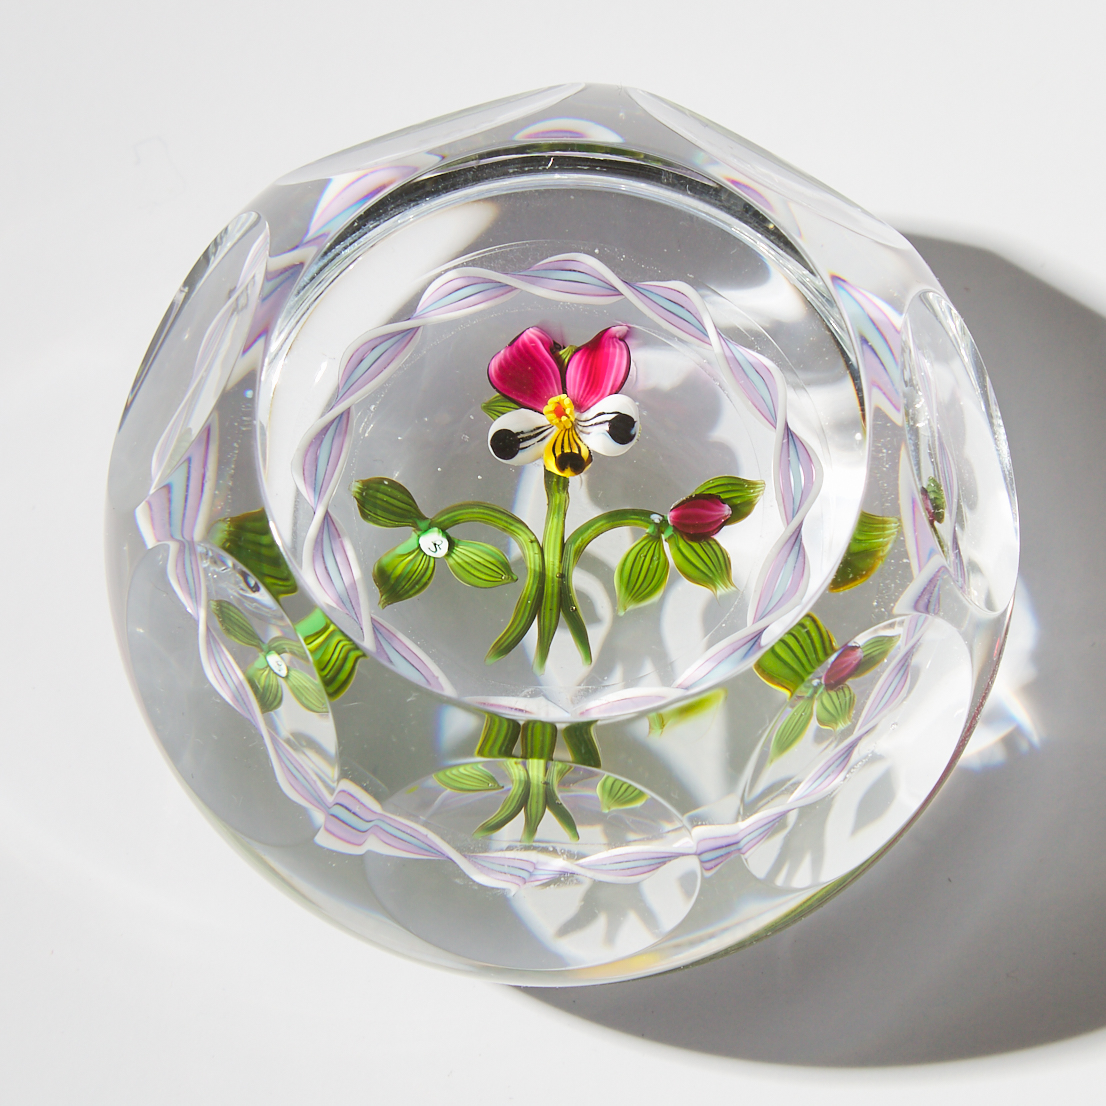 Johne Parsley (American, 1916-2009), 'Johnny Jump Up' Floral Faceted Paperweight, 1999